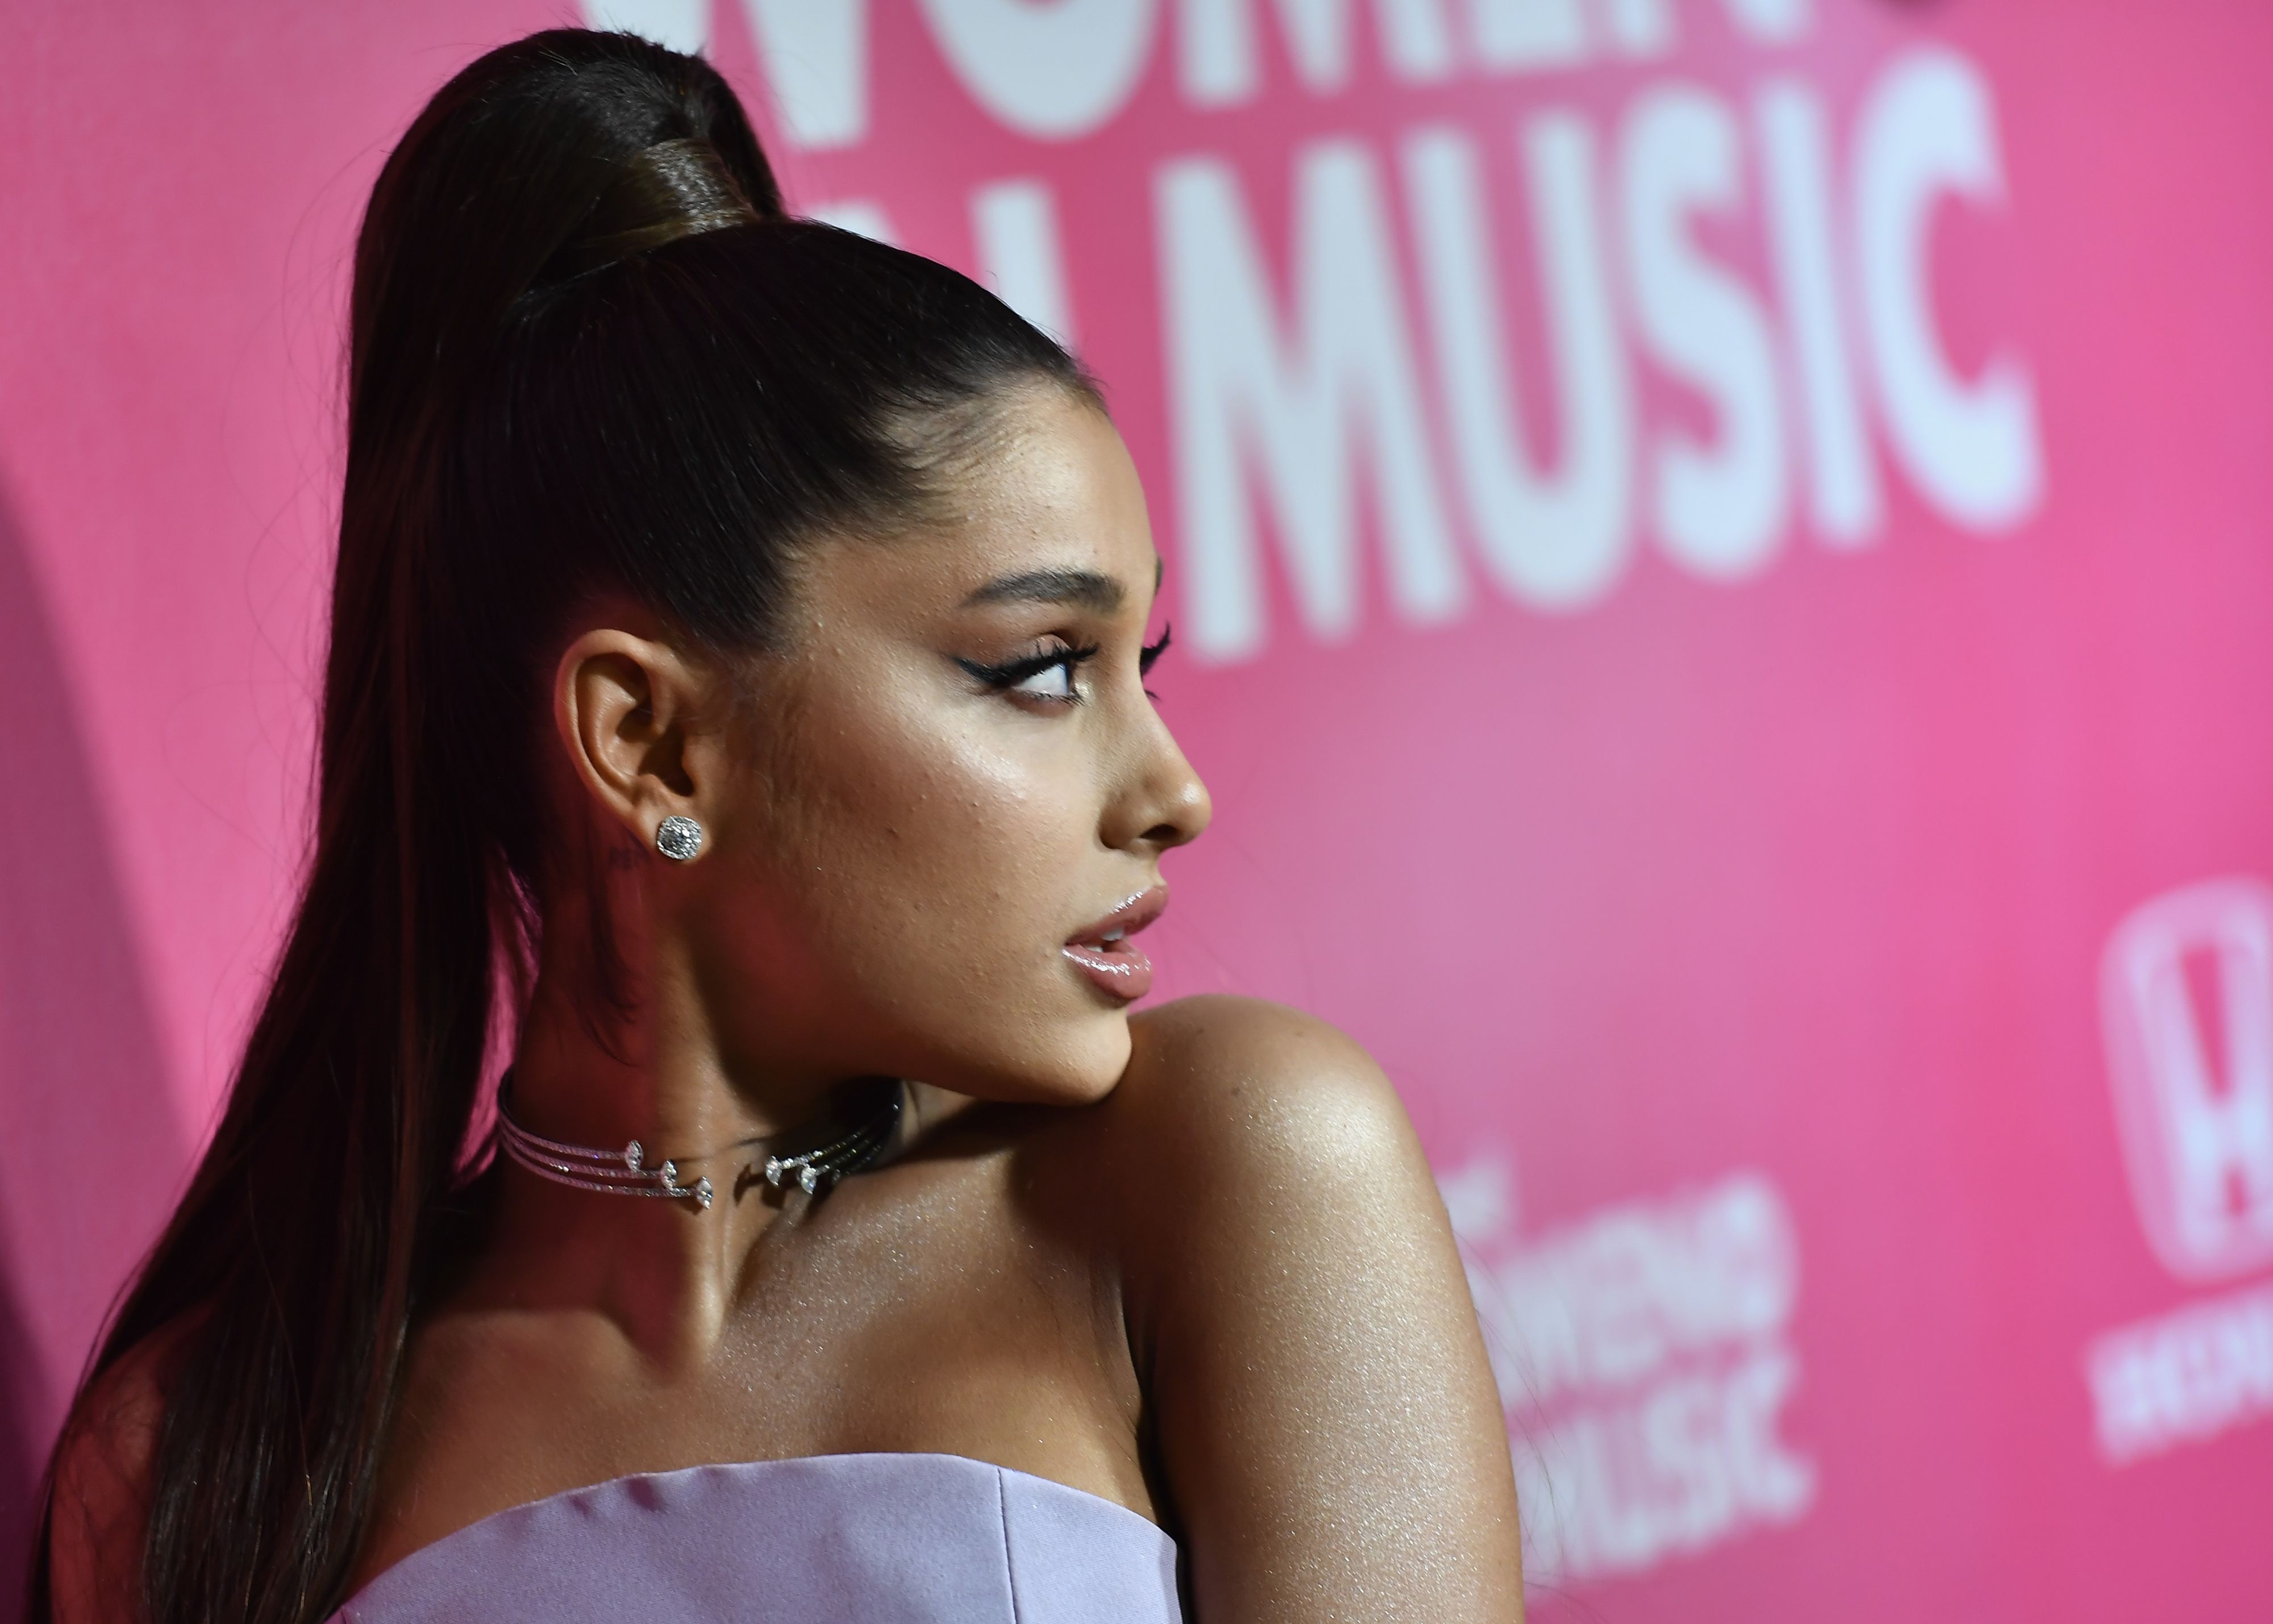 Ariana Grande may have to cancel concerts